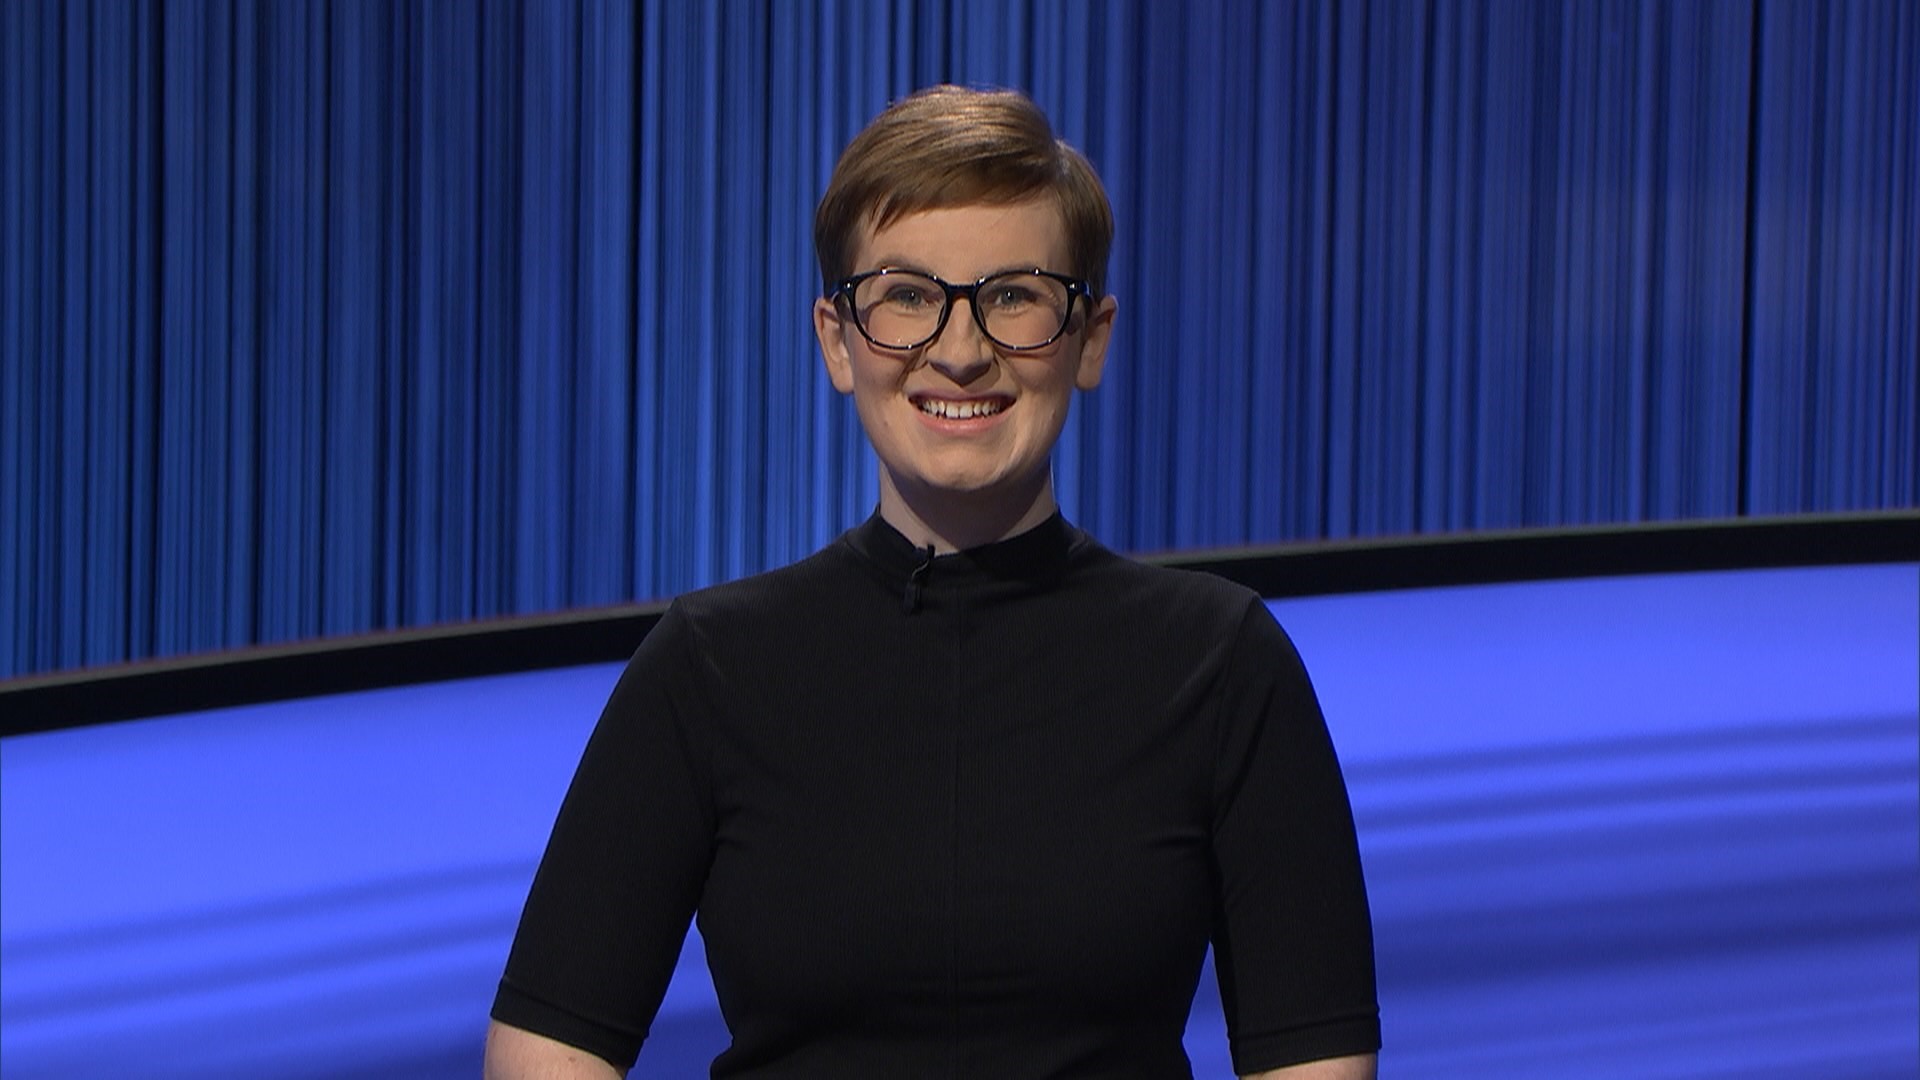 Our own Wren Romero competes on Jeopardy! 